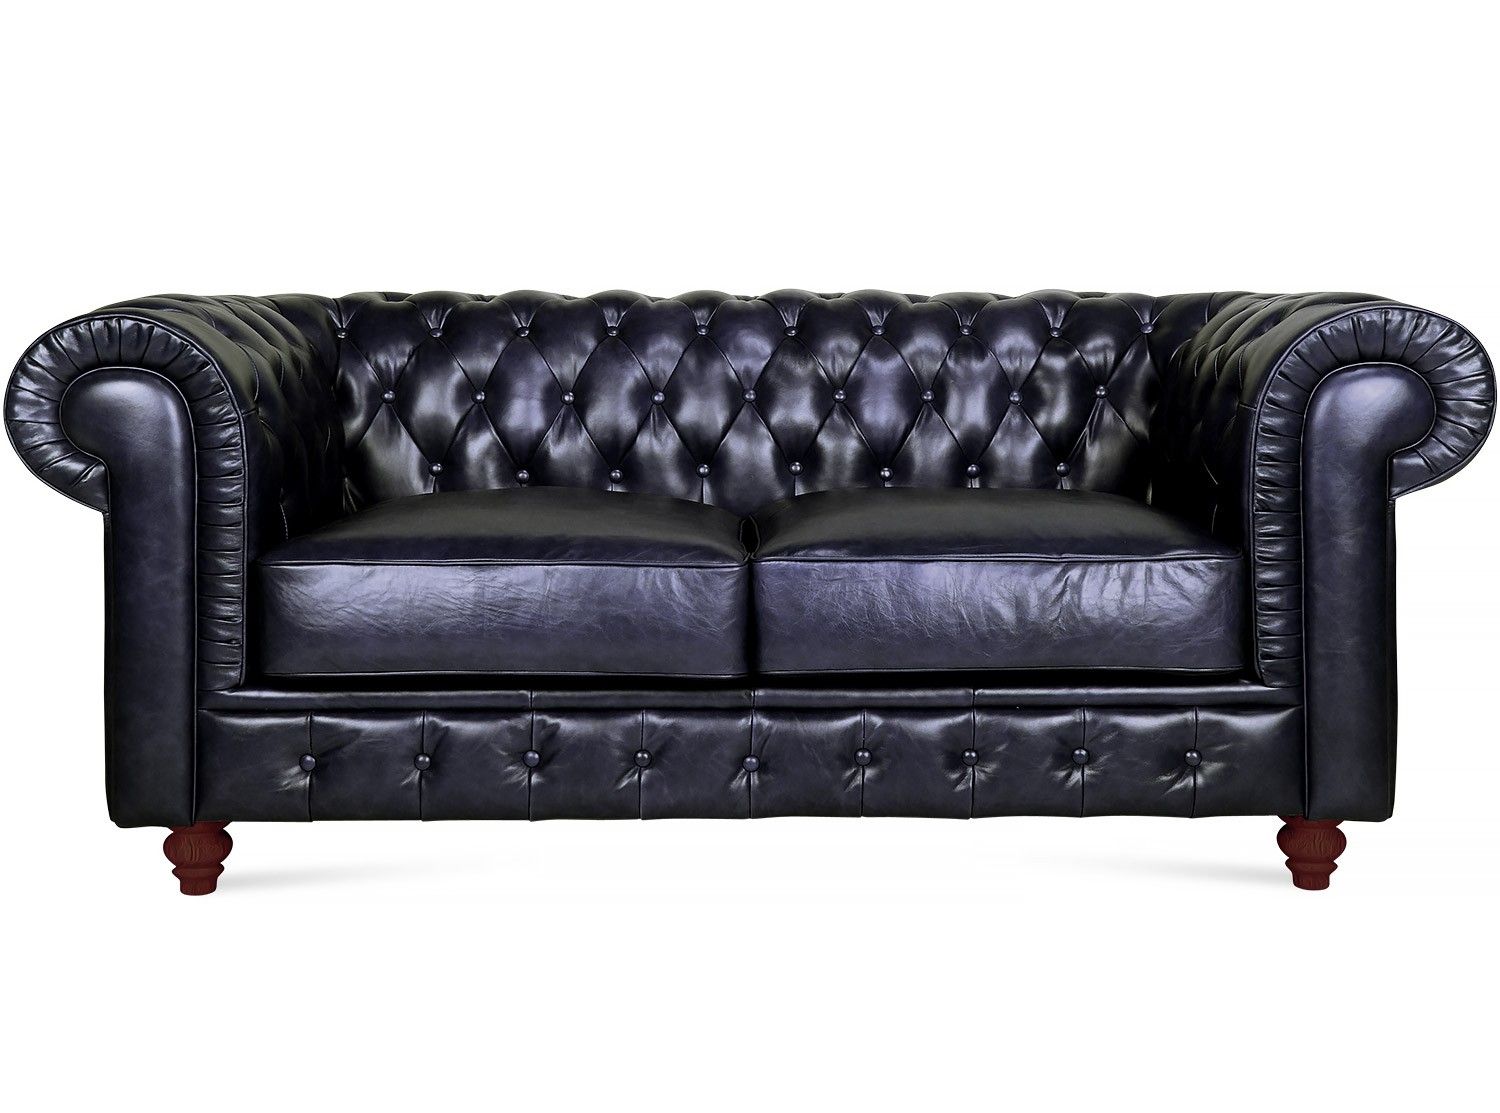 Chesterfield Sofa 2 Seater | Chicicat With Two Seater Sofas (View 7 of 15)